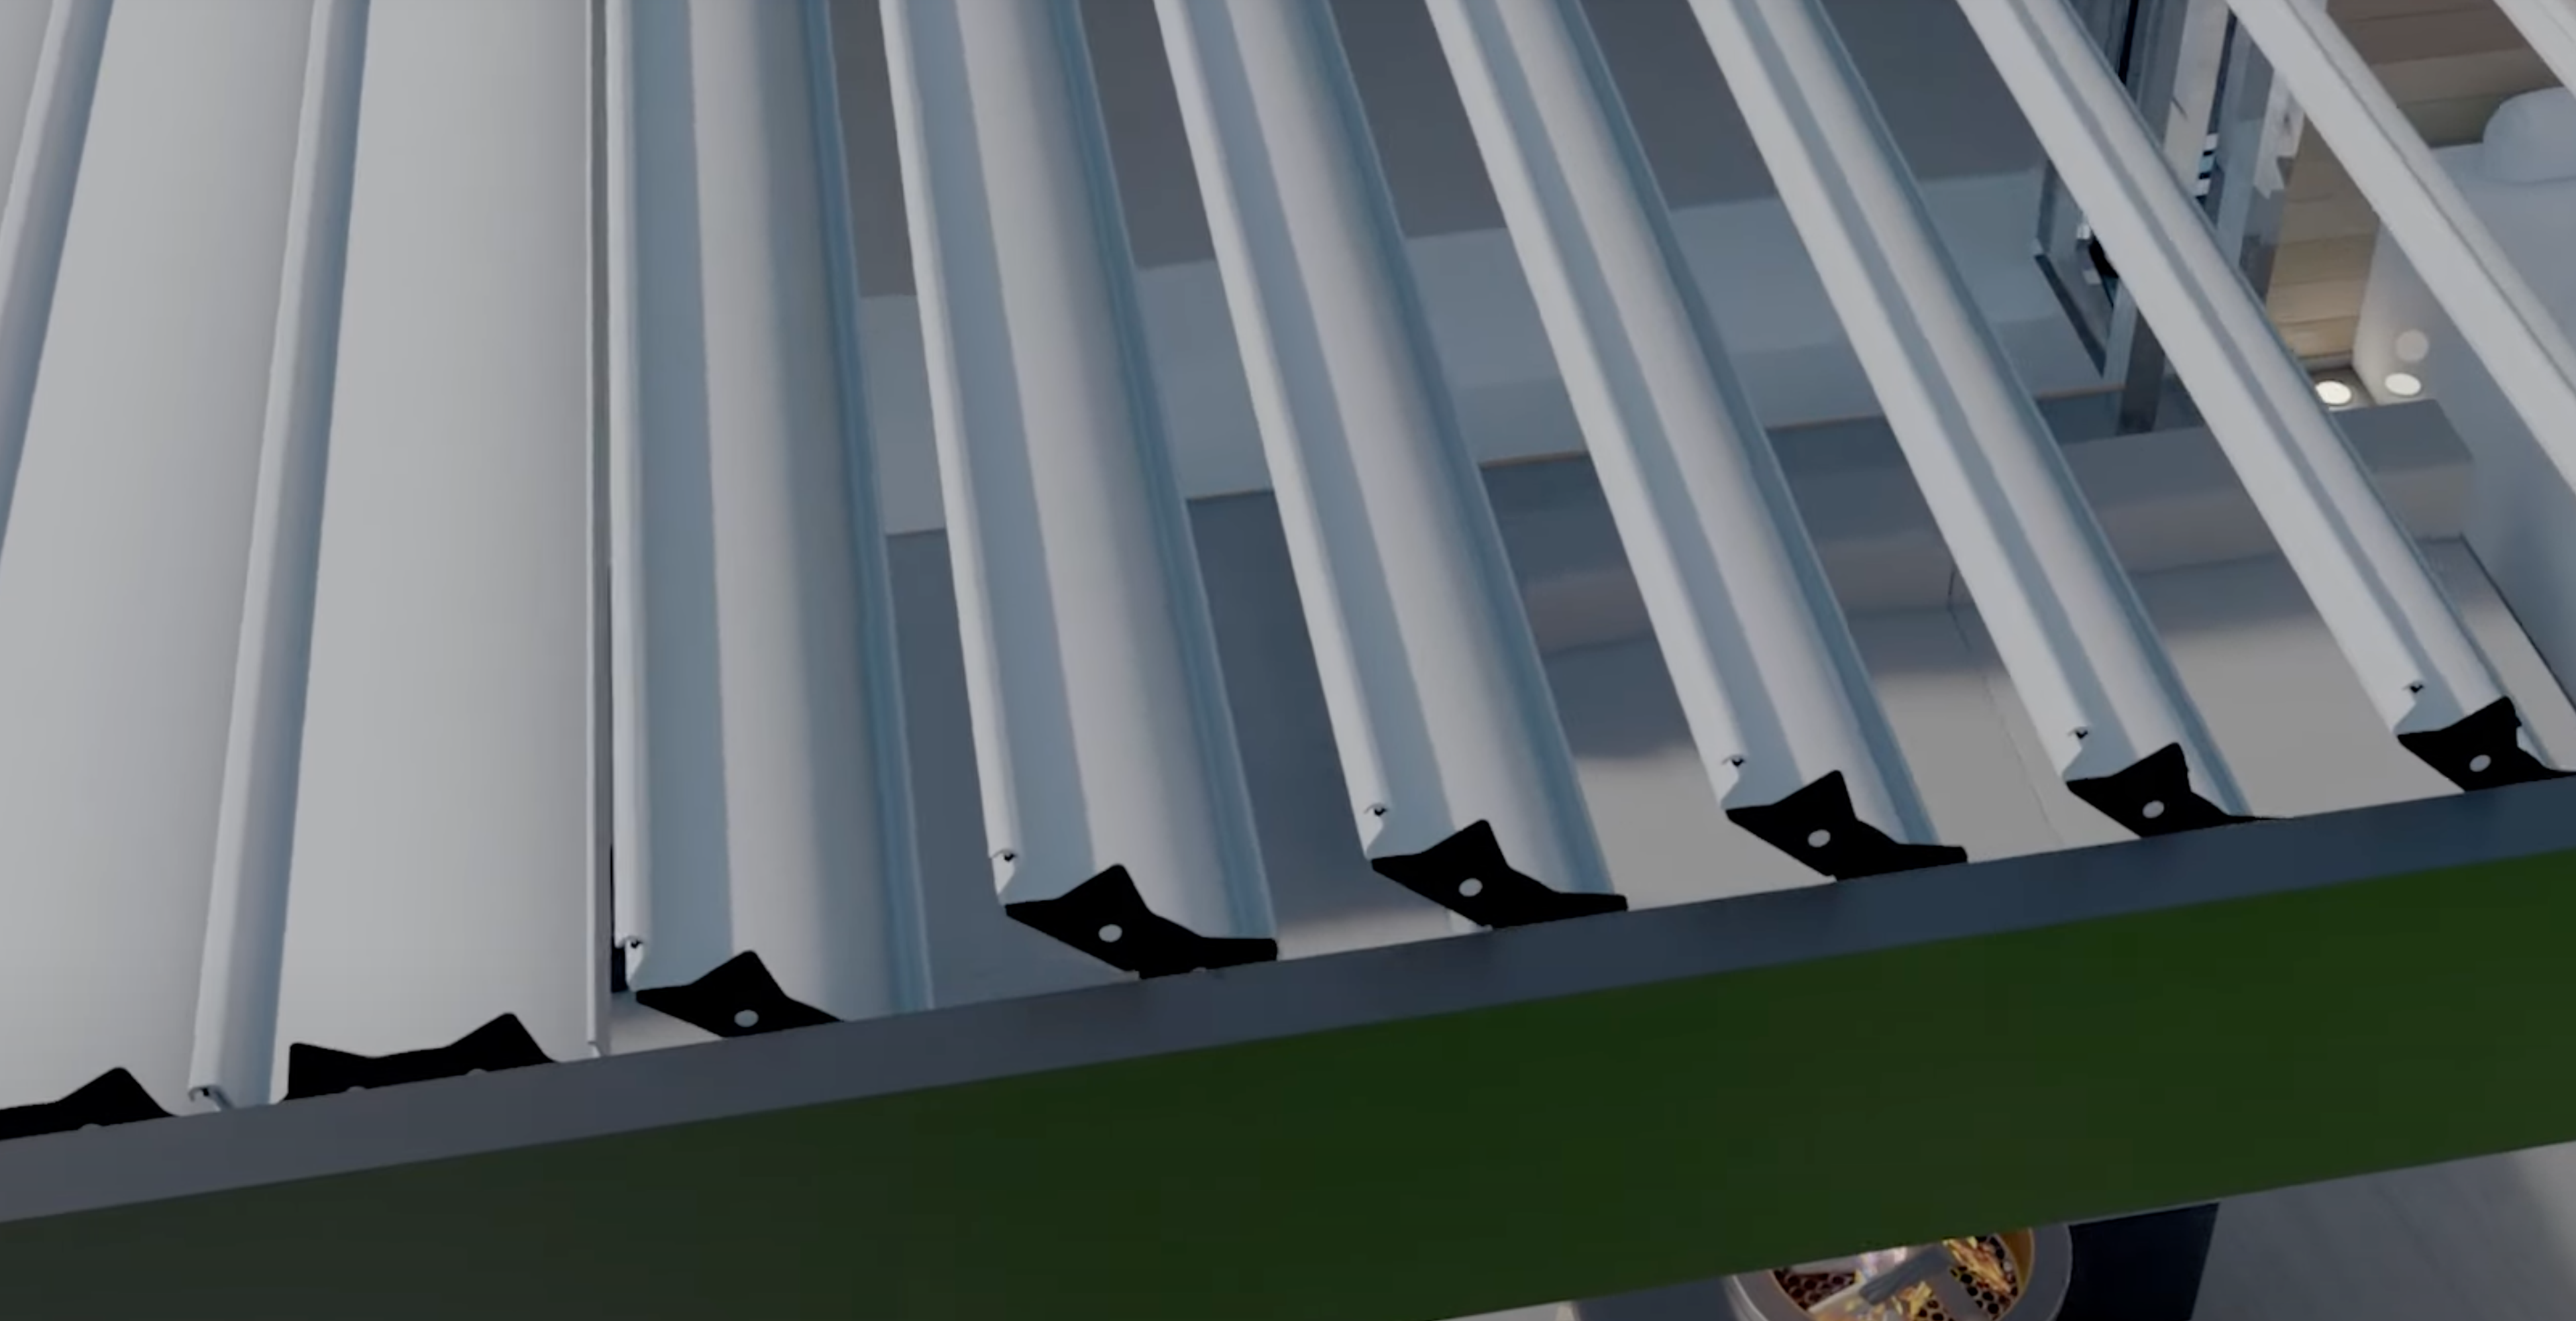 louvers in louvered roof system